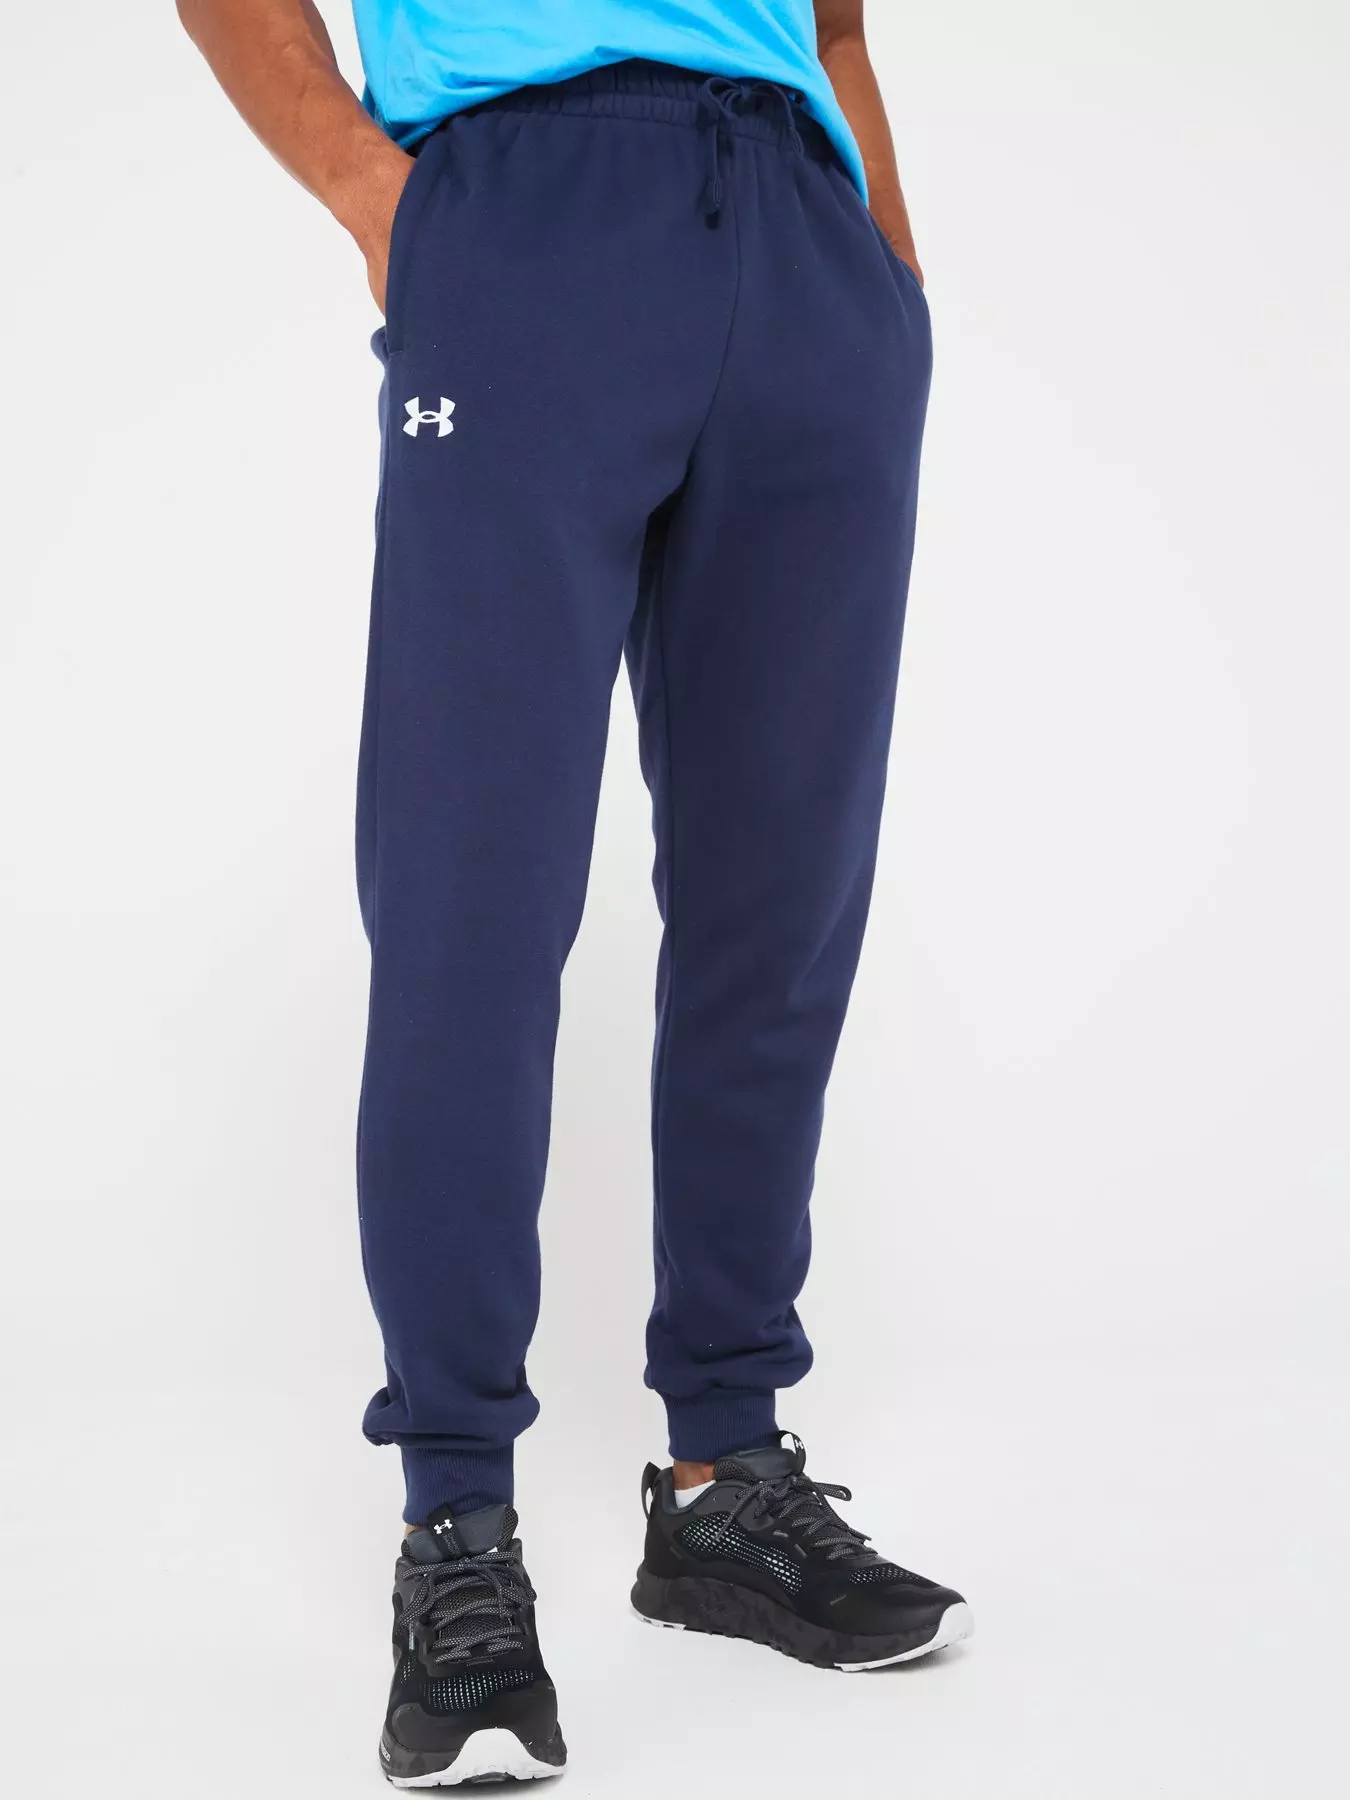  Under Armour Men's Essential Fleece Joggers, Black, S :  Clothing, Shoes & Jewelry